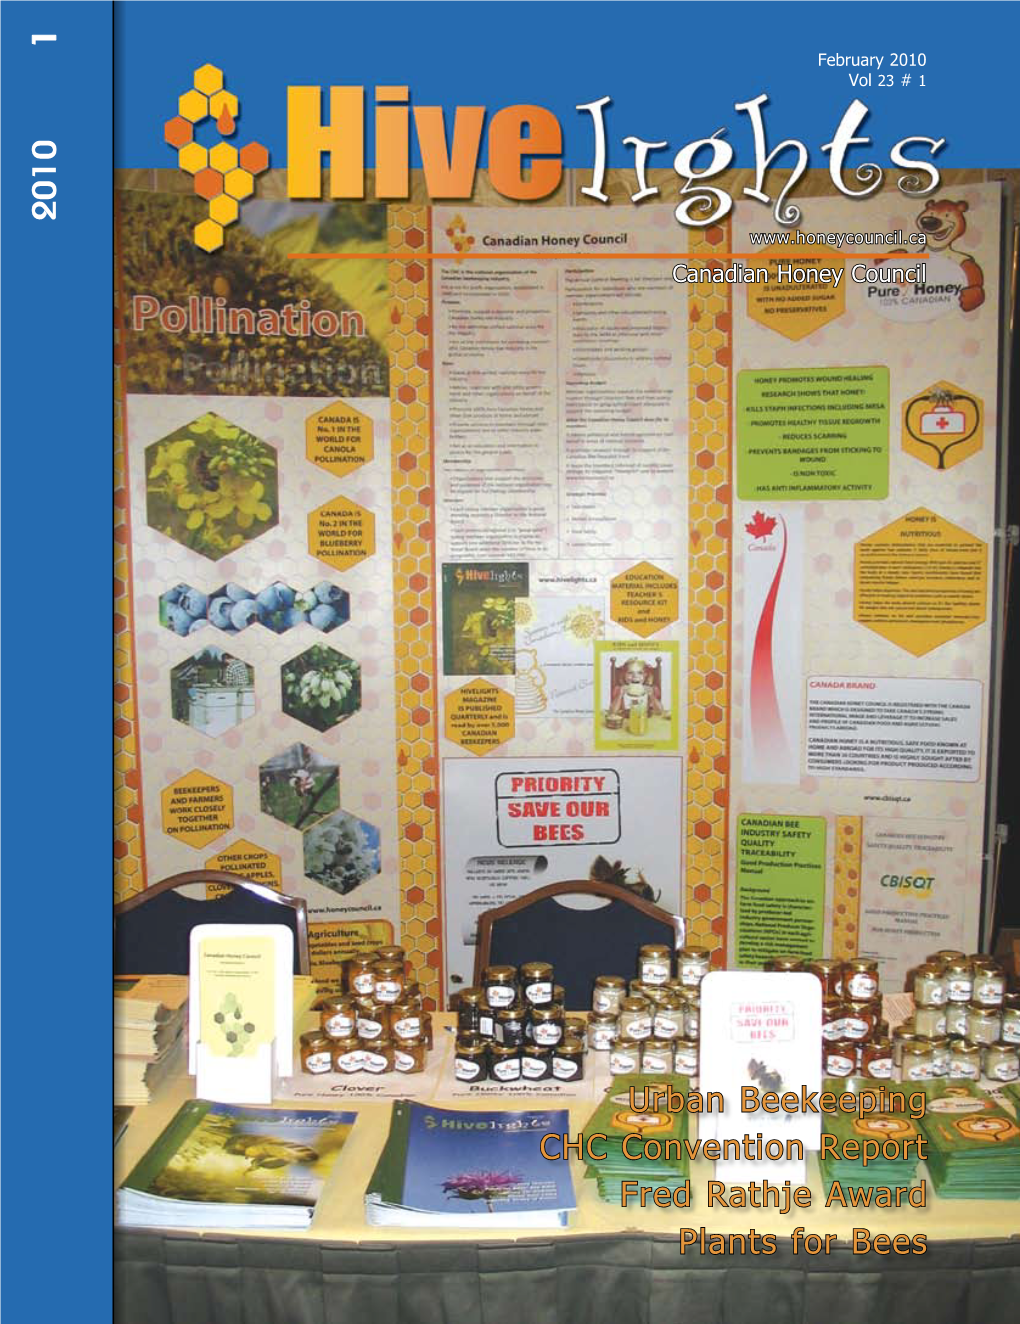 Urban Beekeeping CHC Convention Report Fred Rathje Award Plants for Bees Call Mike at 1-866-948-6084 Today Or Email Mike@Globalpatties.Com